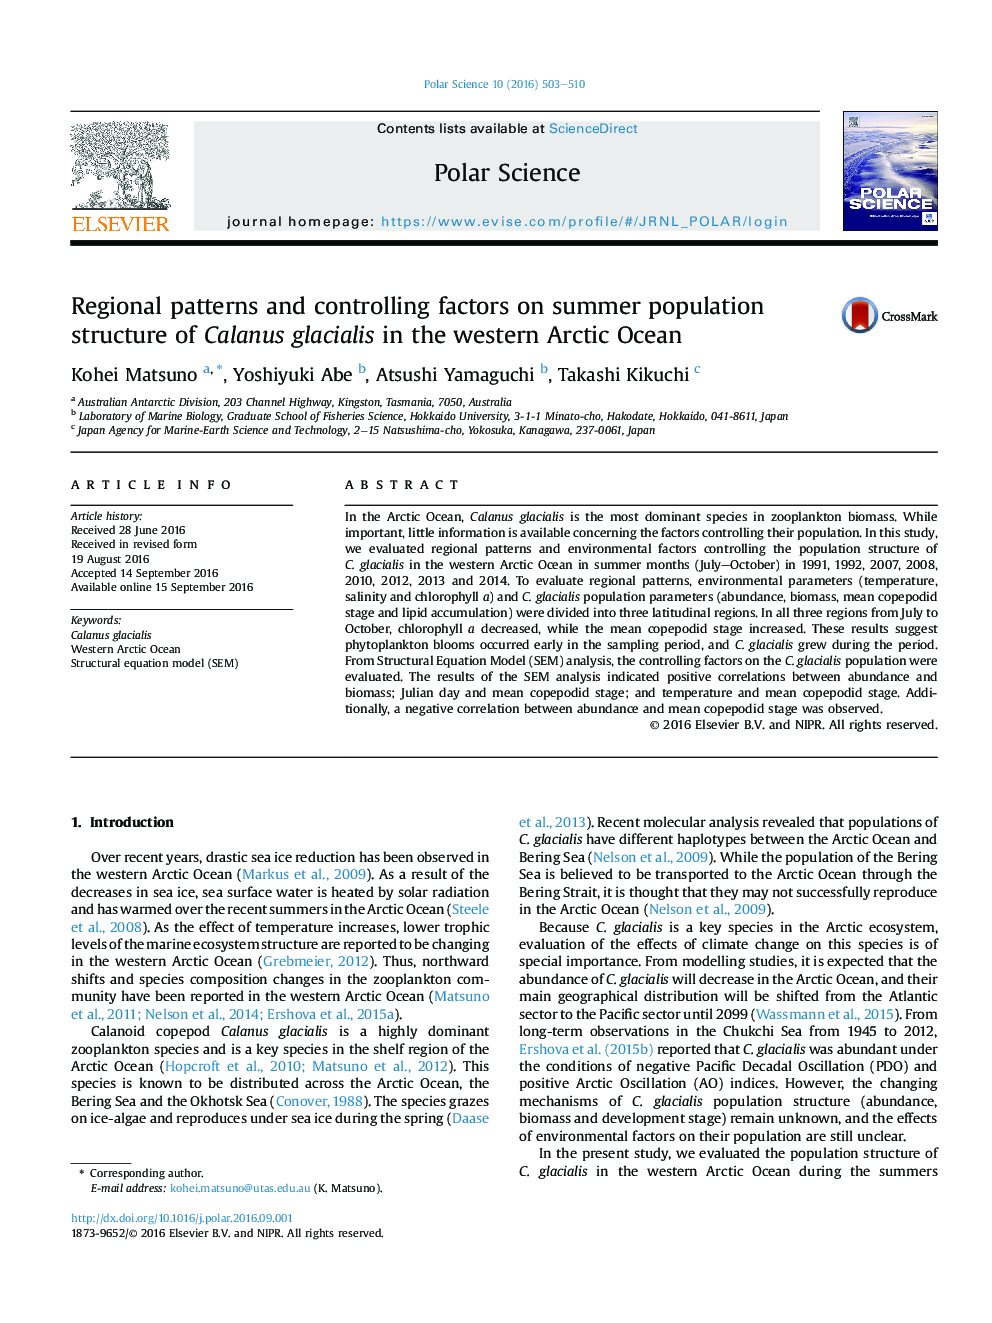 Regional patterns and controlling factors on summer population structure of Calanus glacialis in the western Arctic Ocean